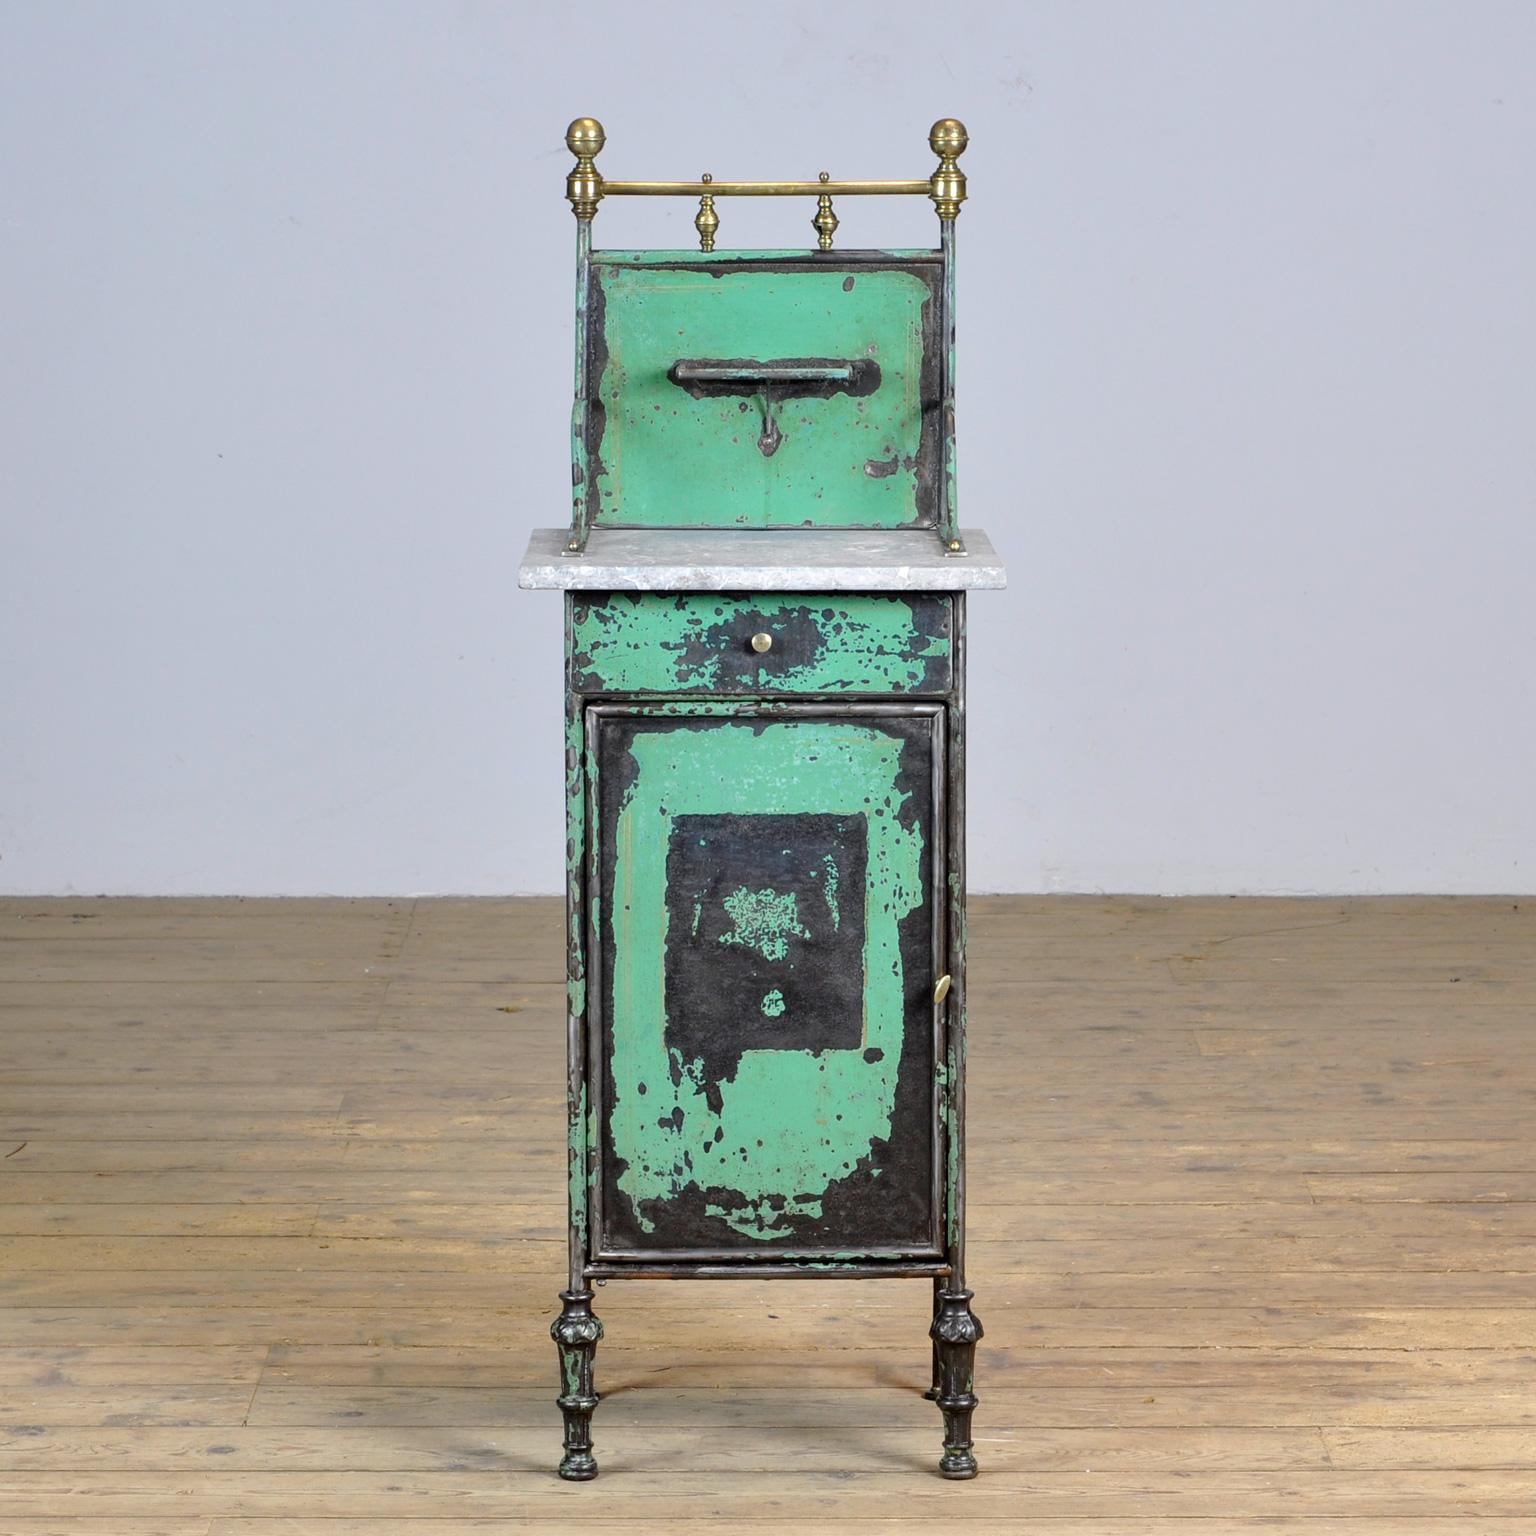 Iron hospital bedside cabinet with a marble top and nice brass details. With the original green paint with fine yellow details. Produced in the 1890s in Germany.